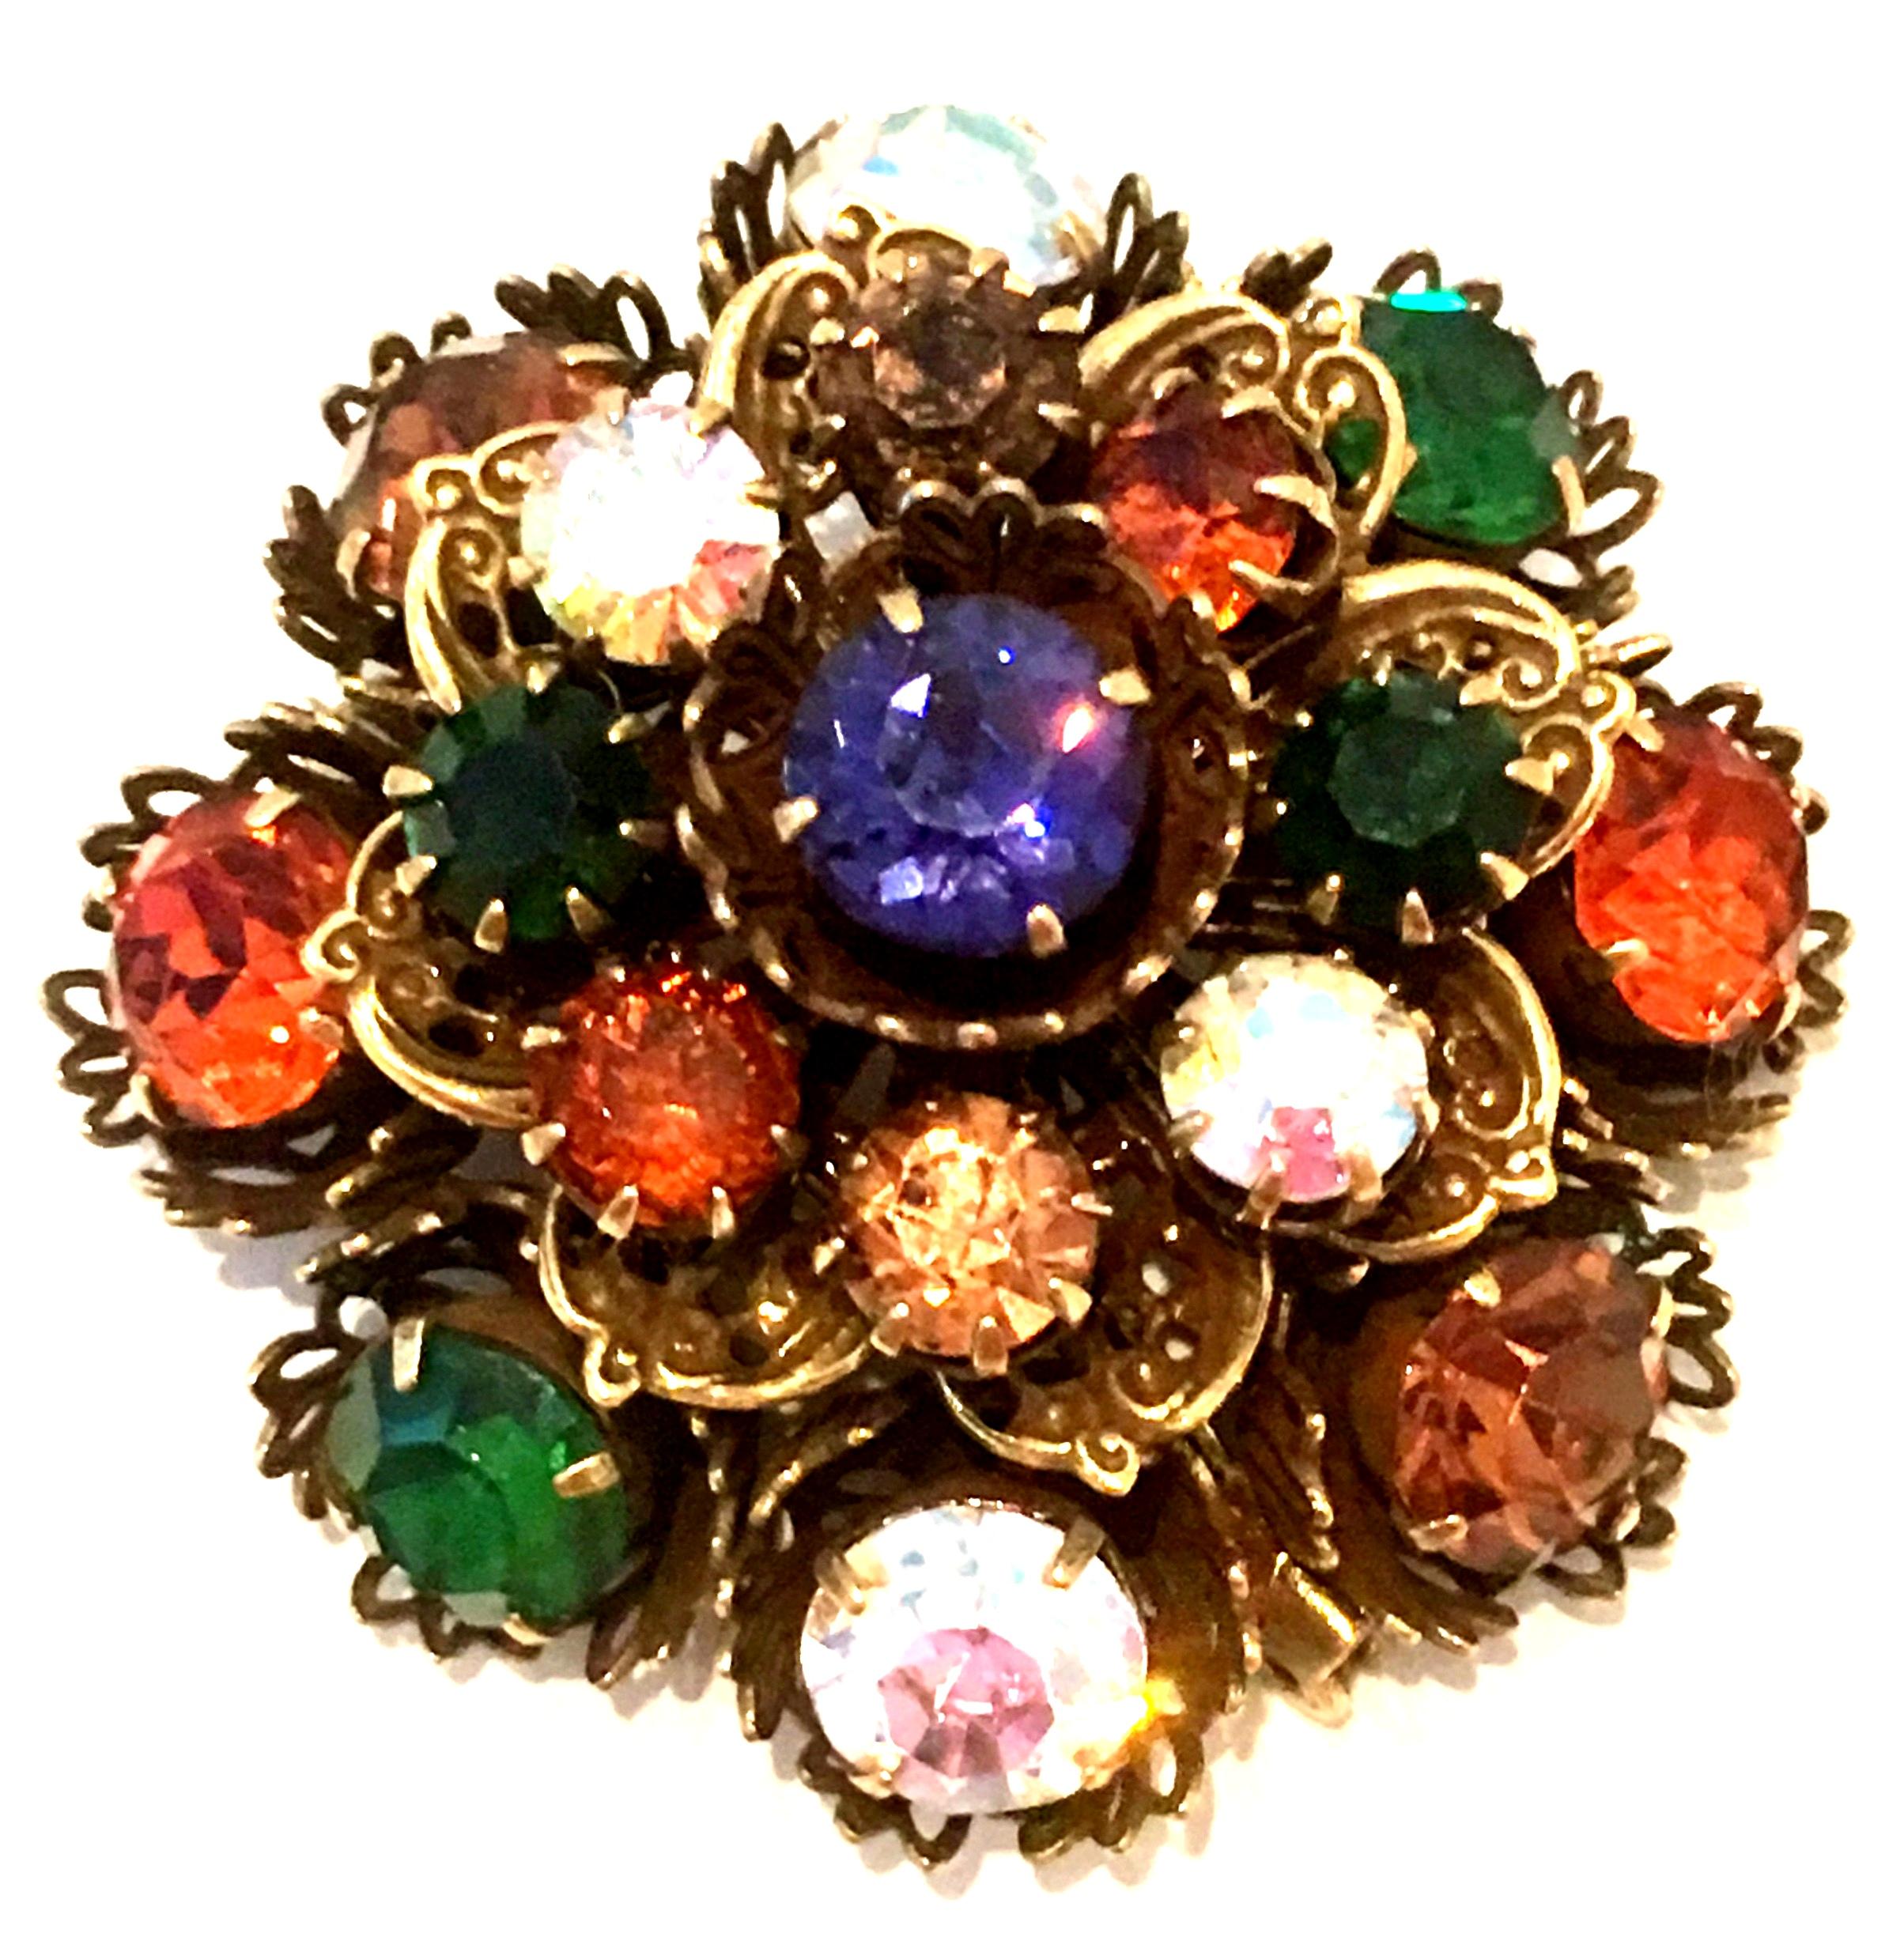 Mid-20th Century Gold Vermeil Dimensional Austrian Crystal Brooch By, Coro. This coveted dimensional gold vermeil brooch features exceptional craftsmanship with large and small fancy prong set brilliant round Austrian Crystal stones. The larger